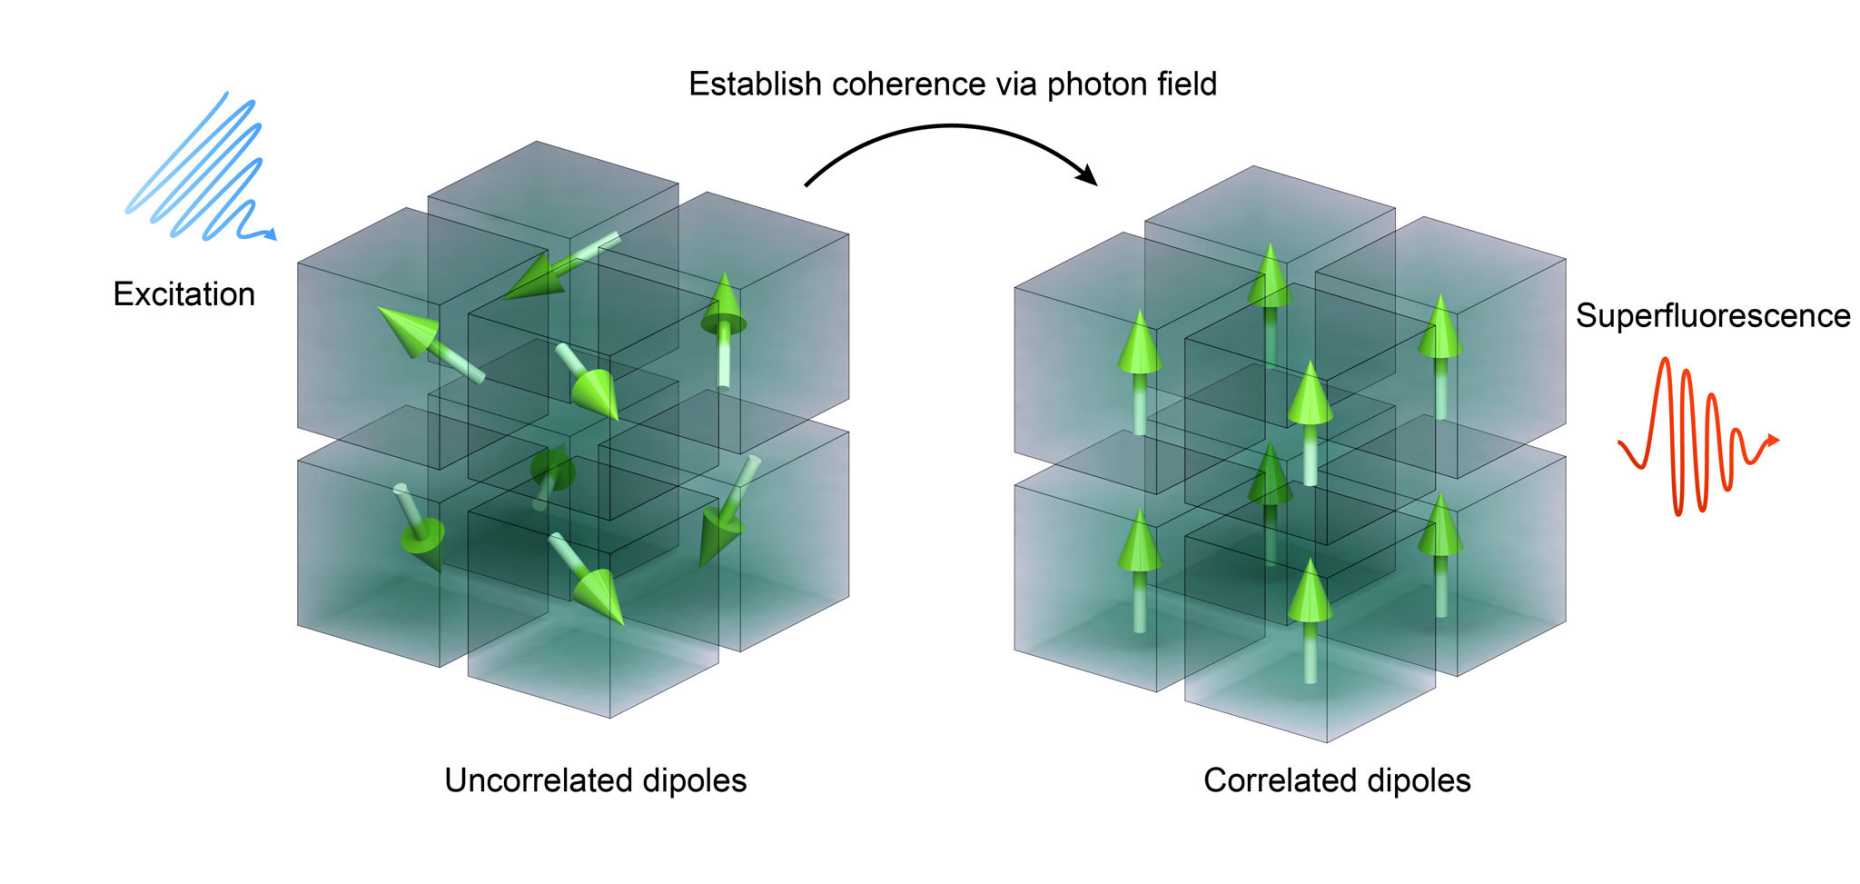 Superfluorescence: Excited dipoles